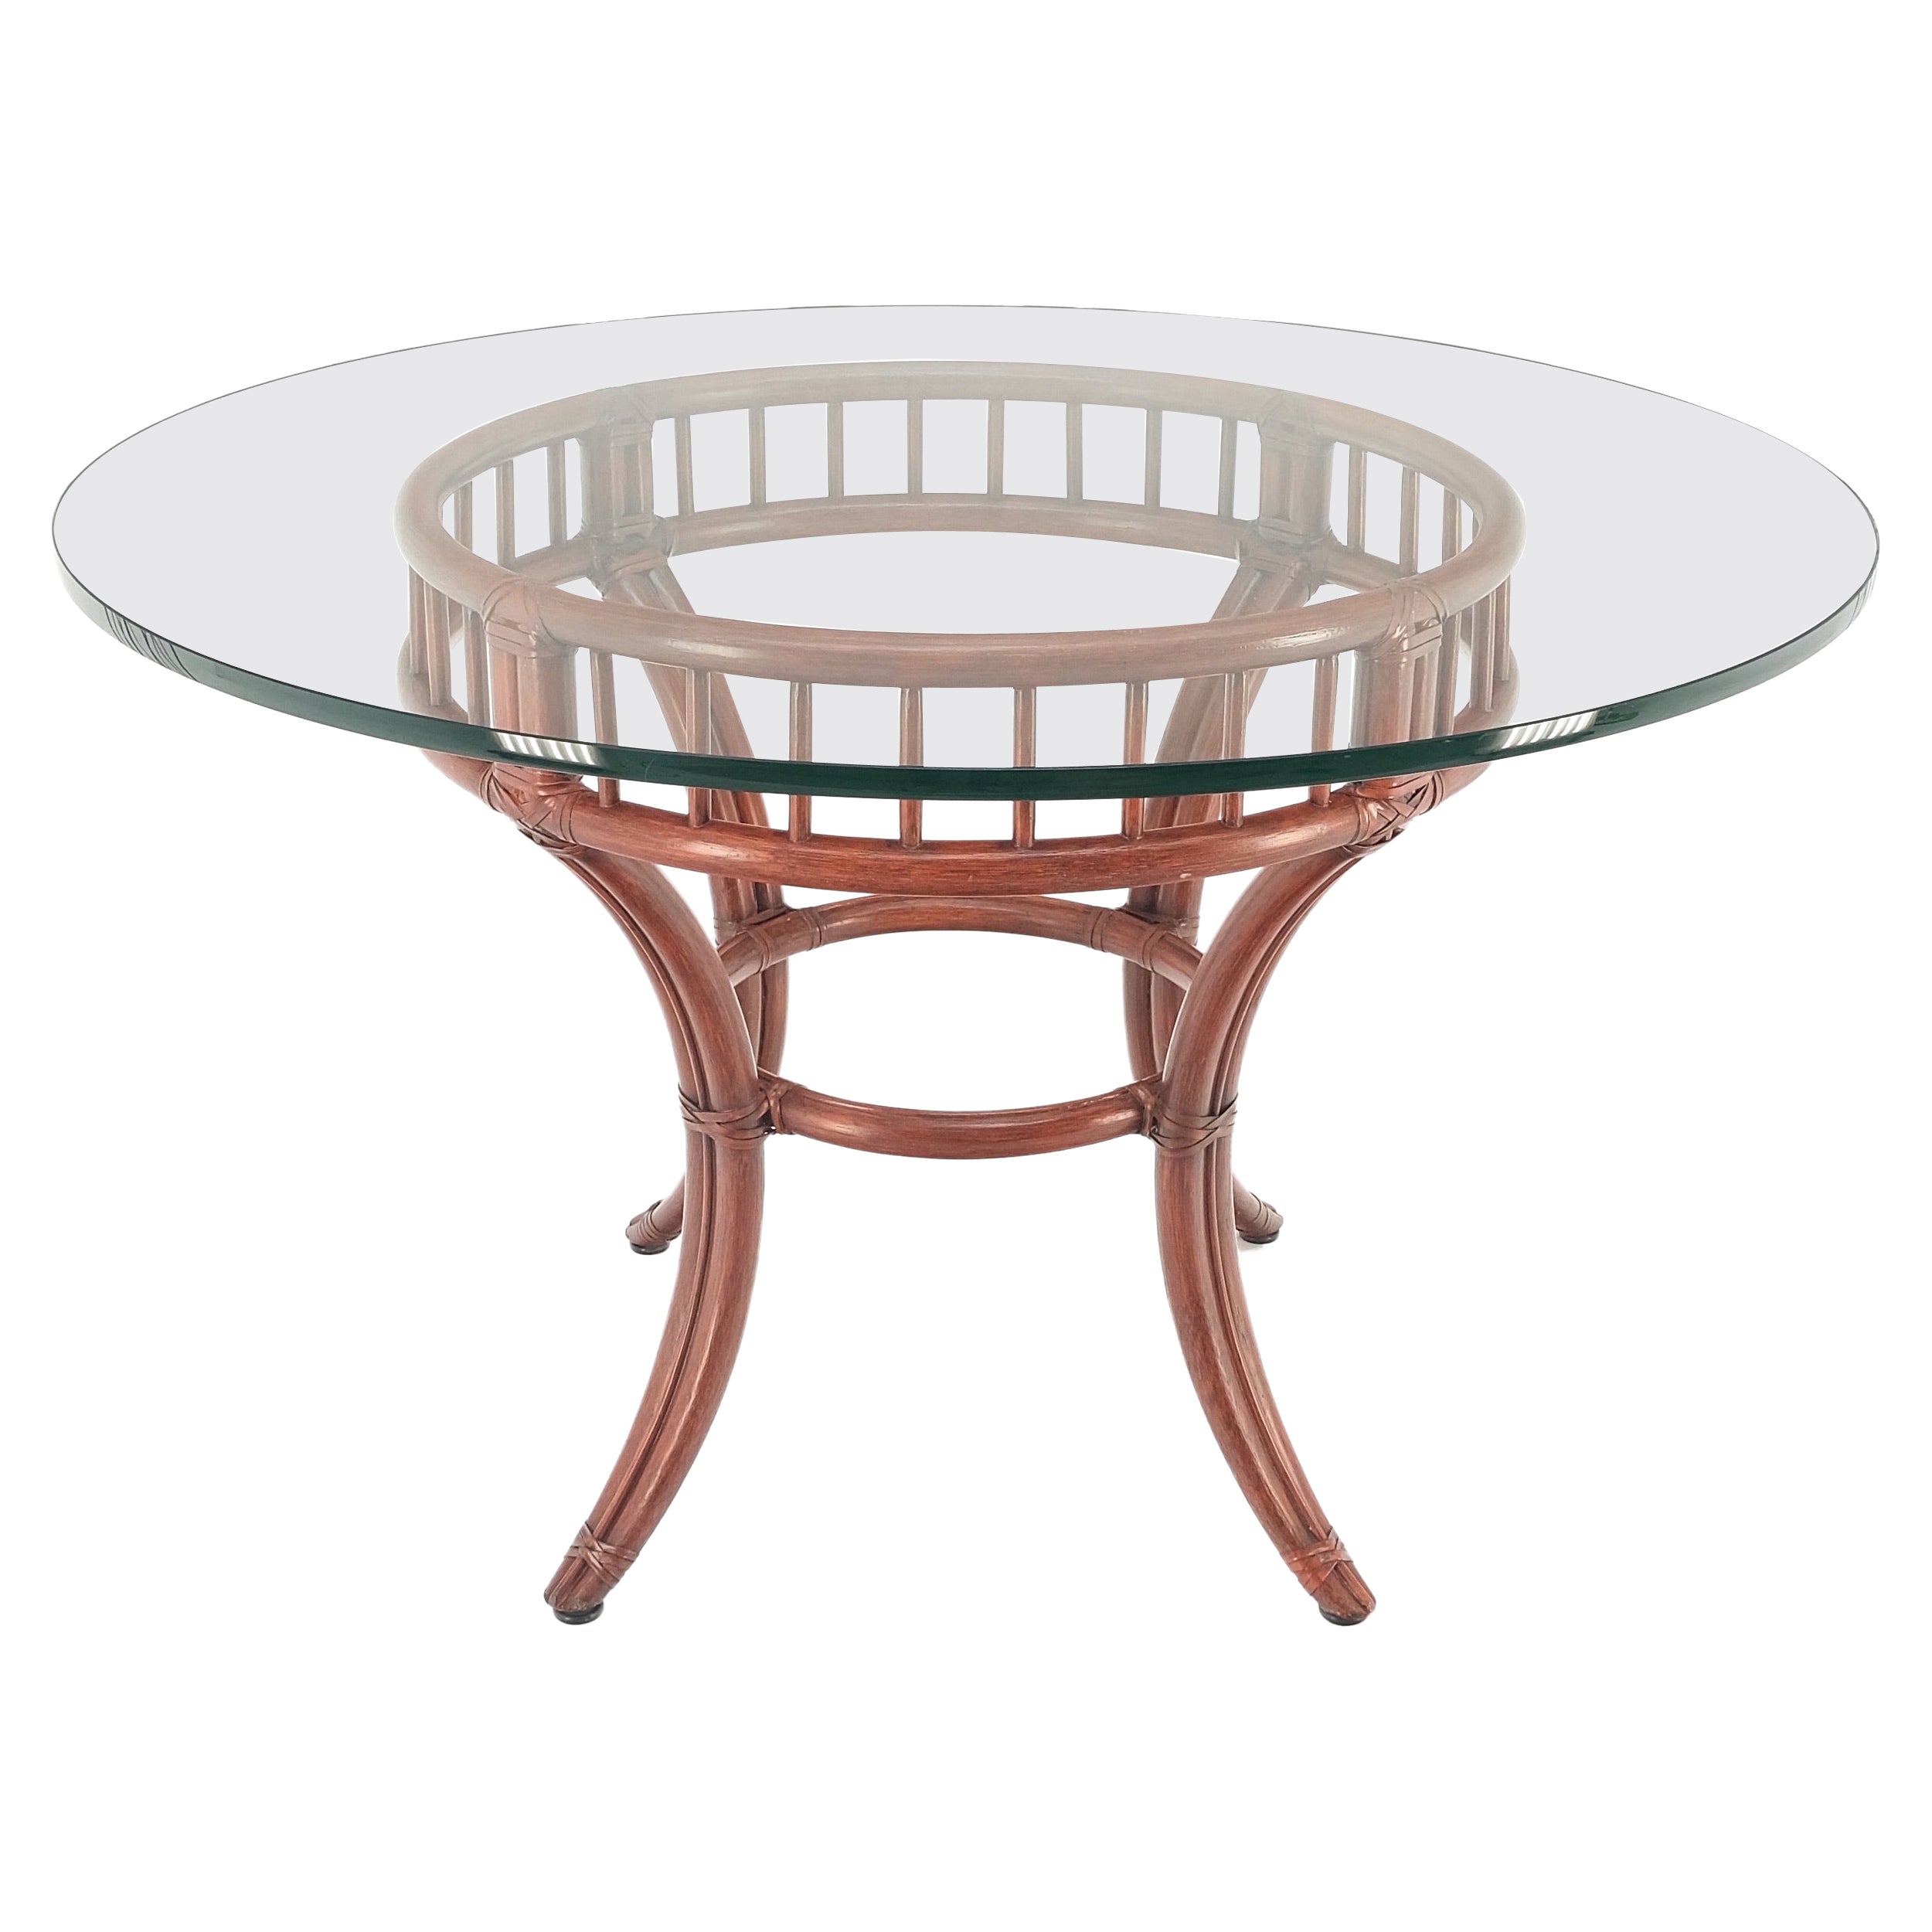 Large Round Bamboo Glass Top MCM Dining Dinette Table by McGuire MINT!